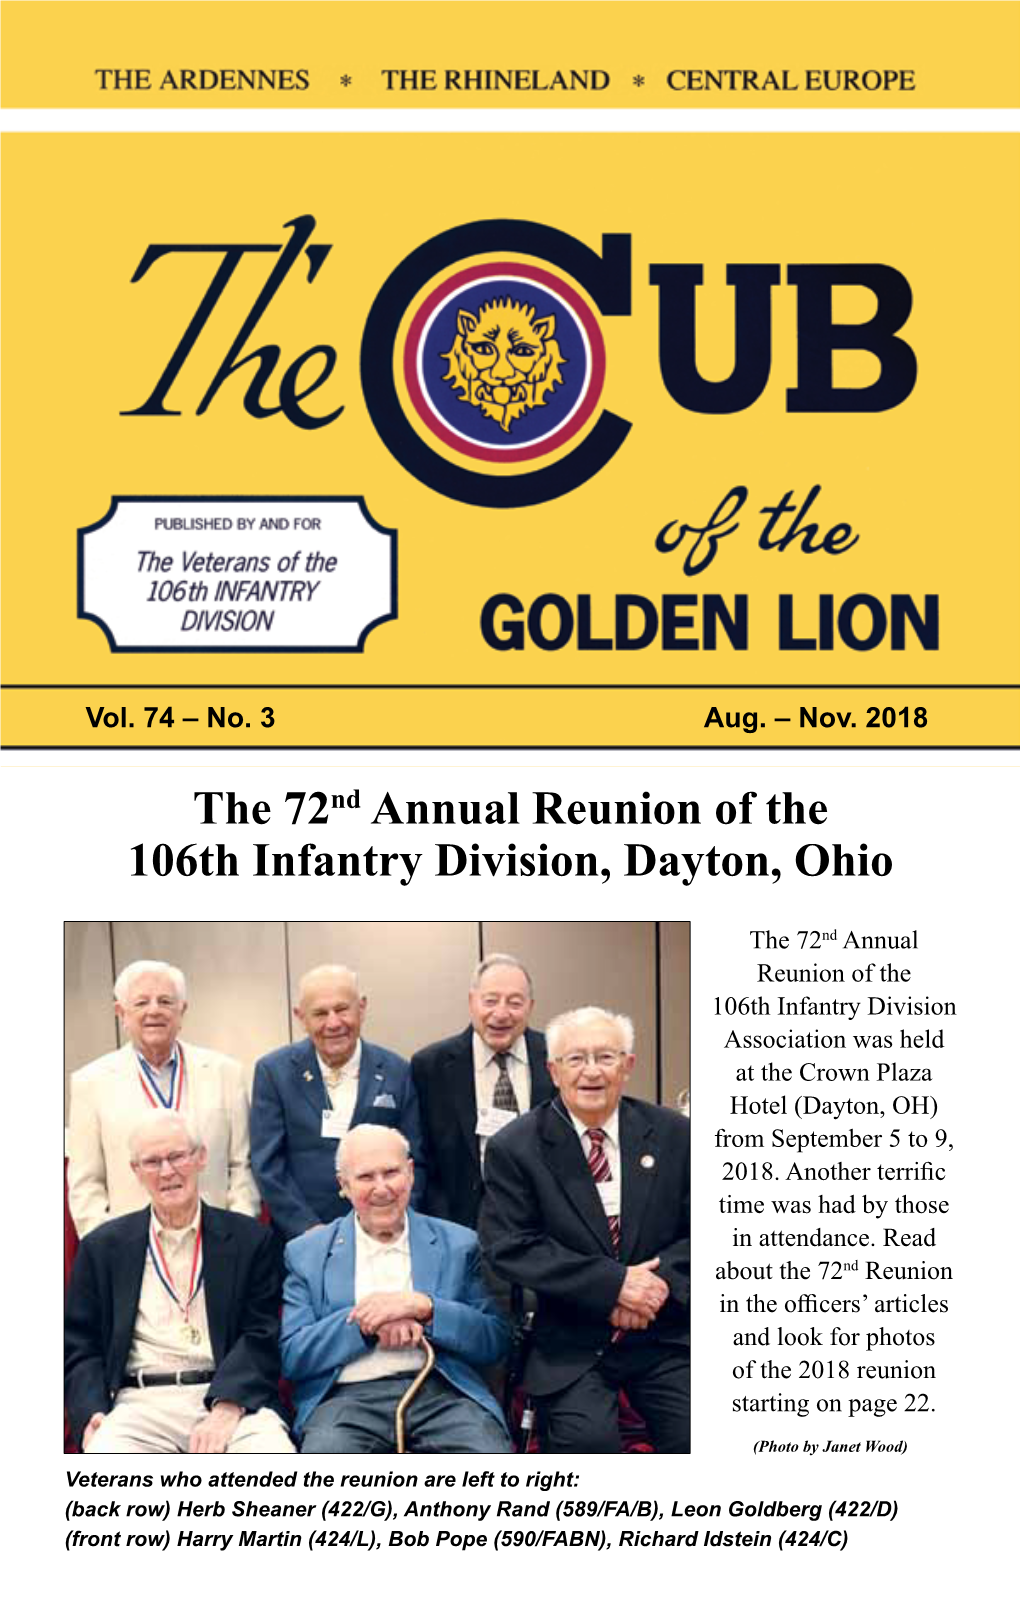 Prior Issue of the CU:B Vol. 74, No. 3